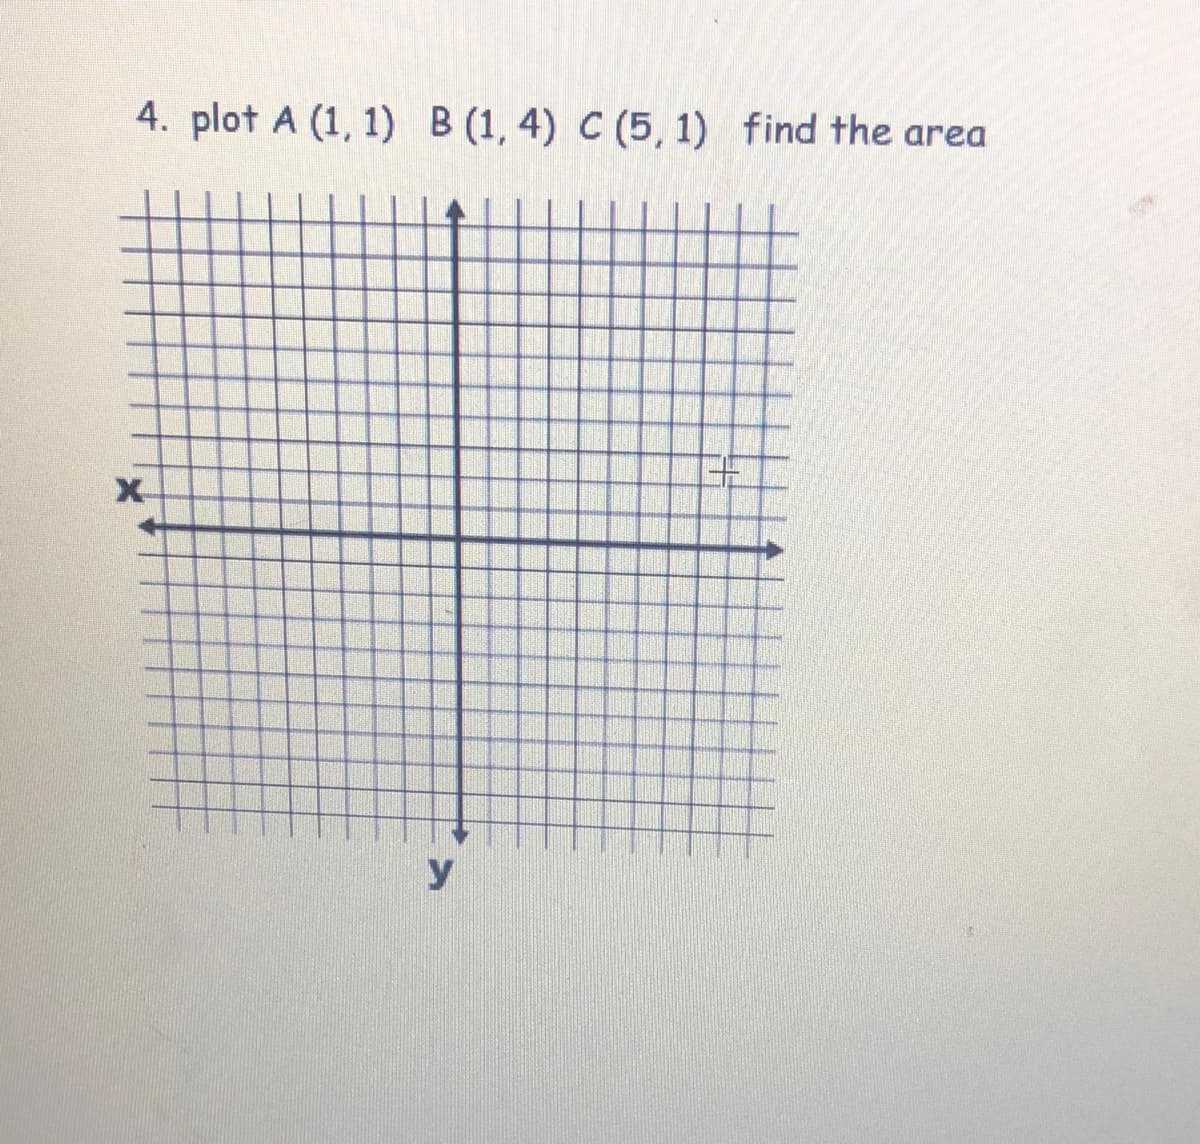 4. plot A (1, 1) B (1, 4) C (5, 1) find the area
y
